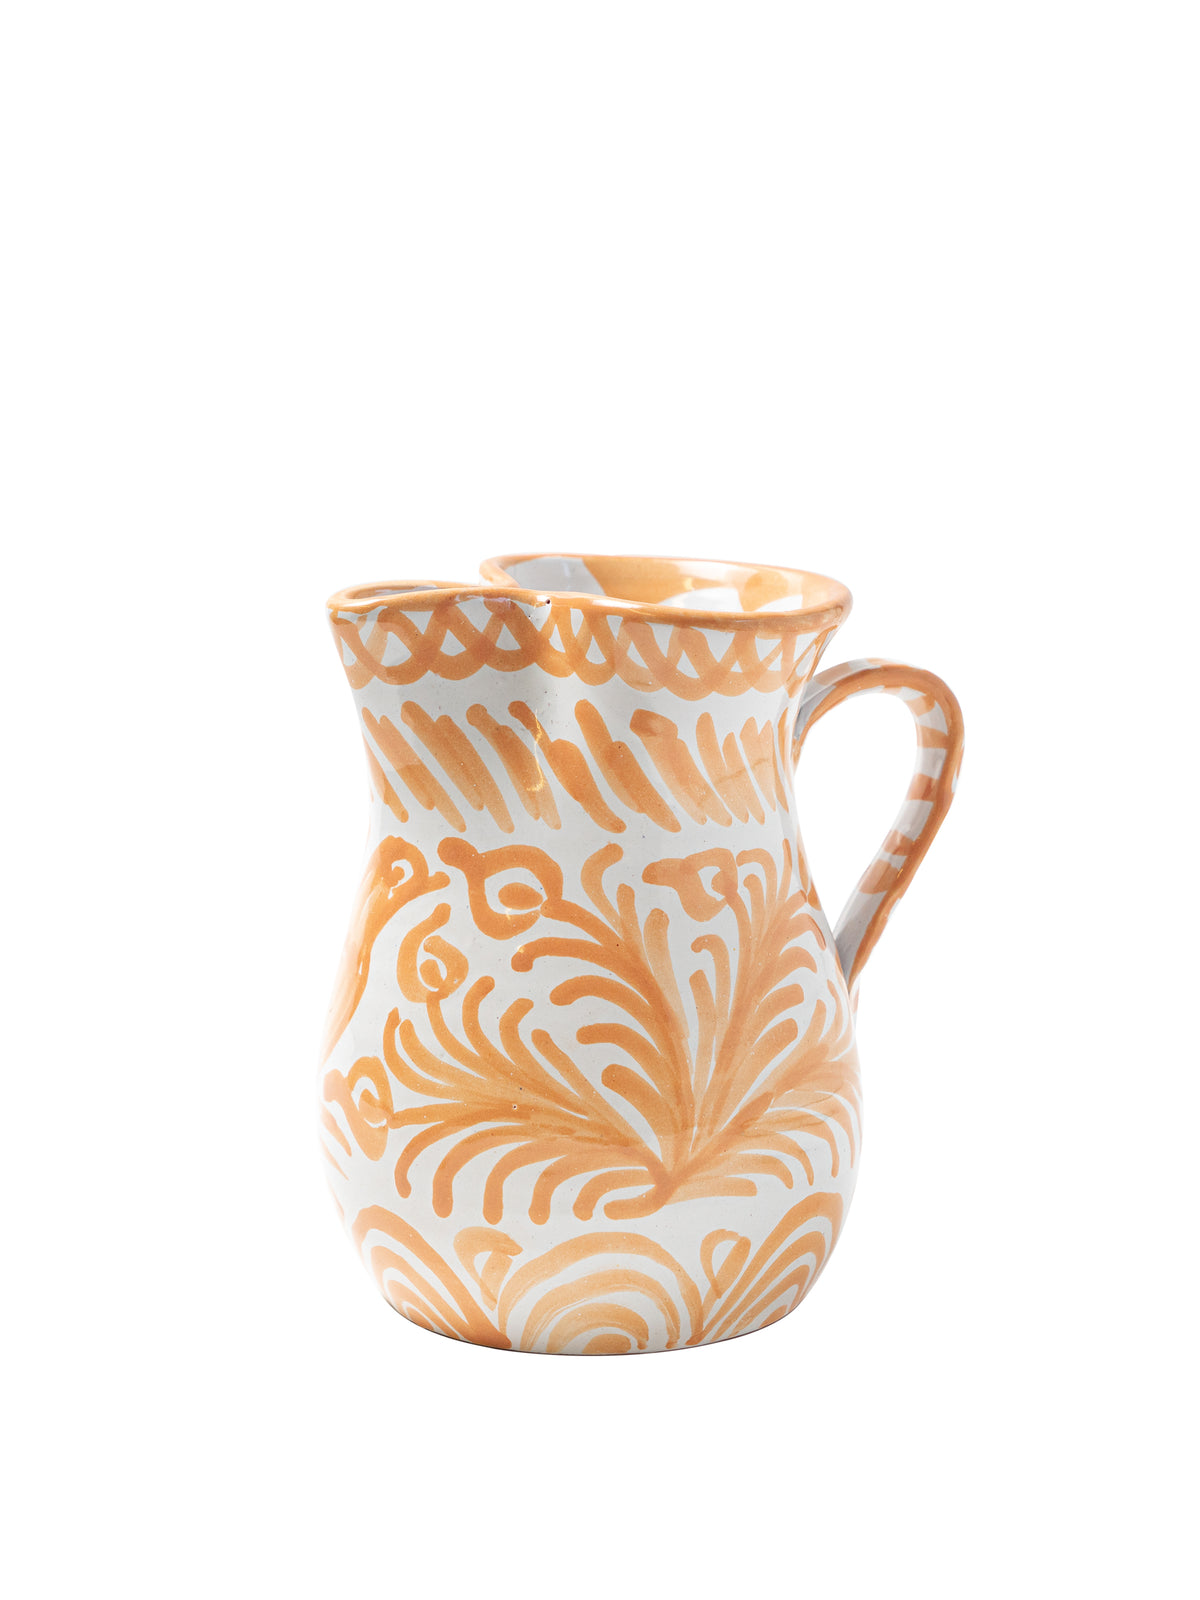 Casa Melocoton Small Pitcher with Hand-painted Designs